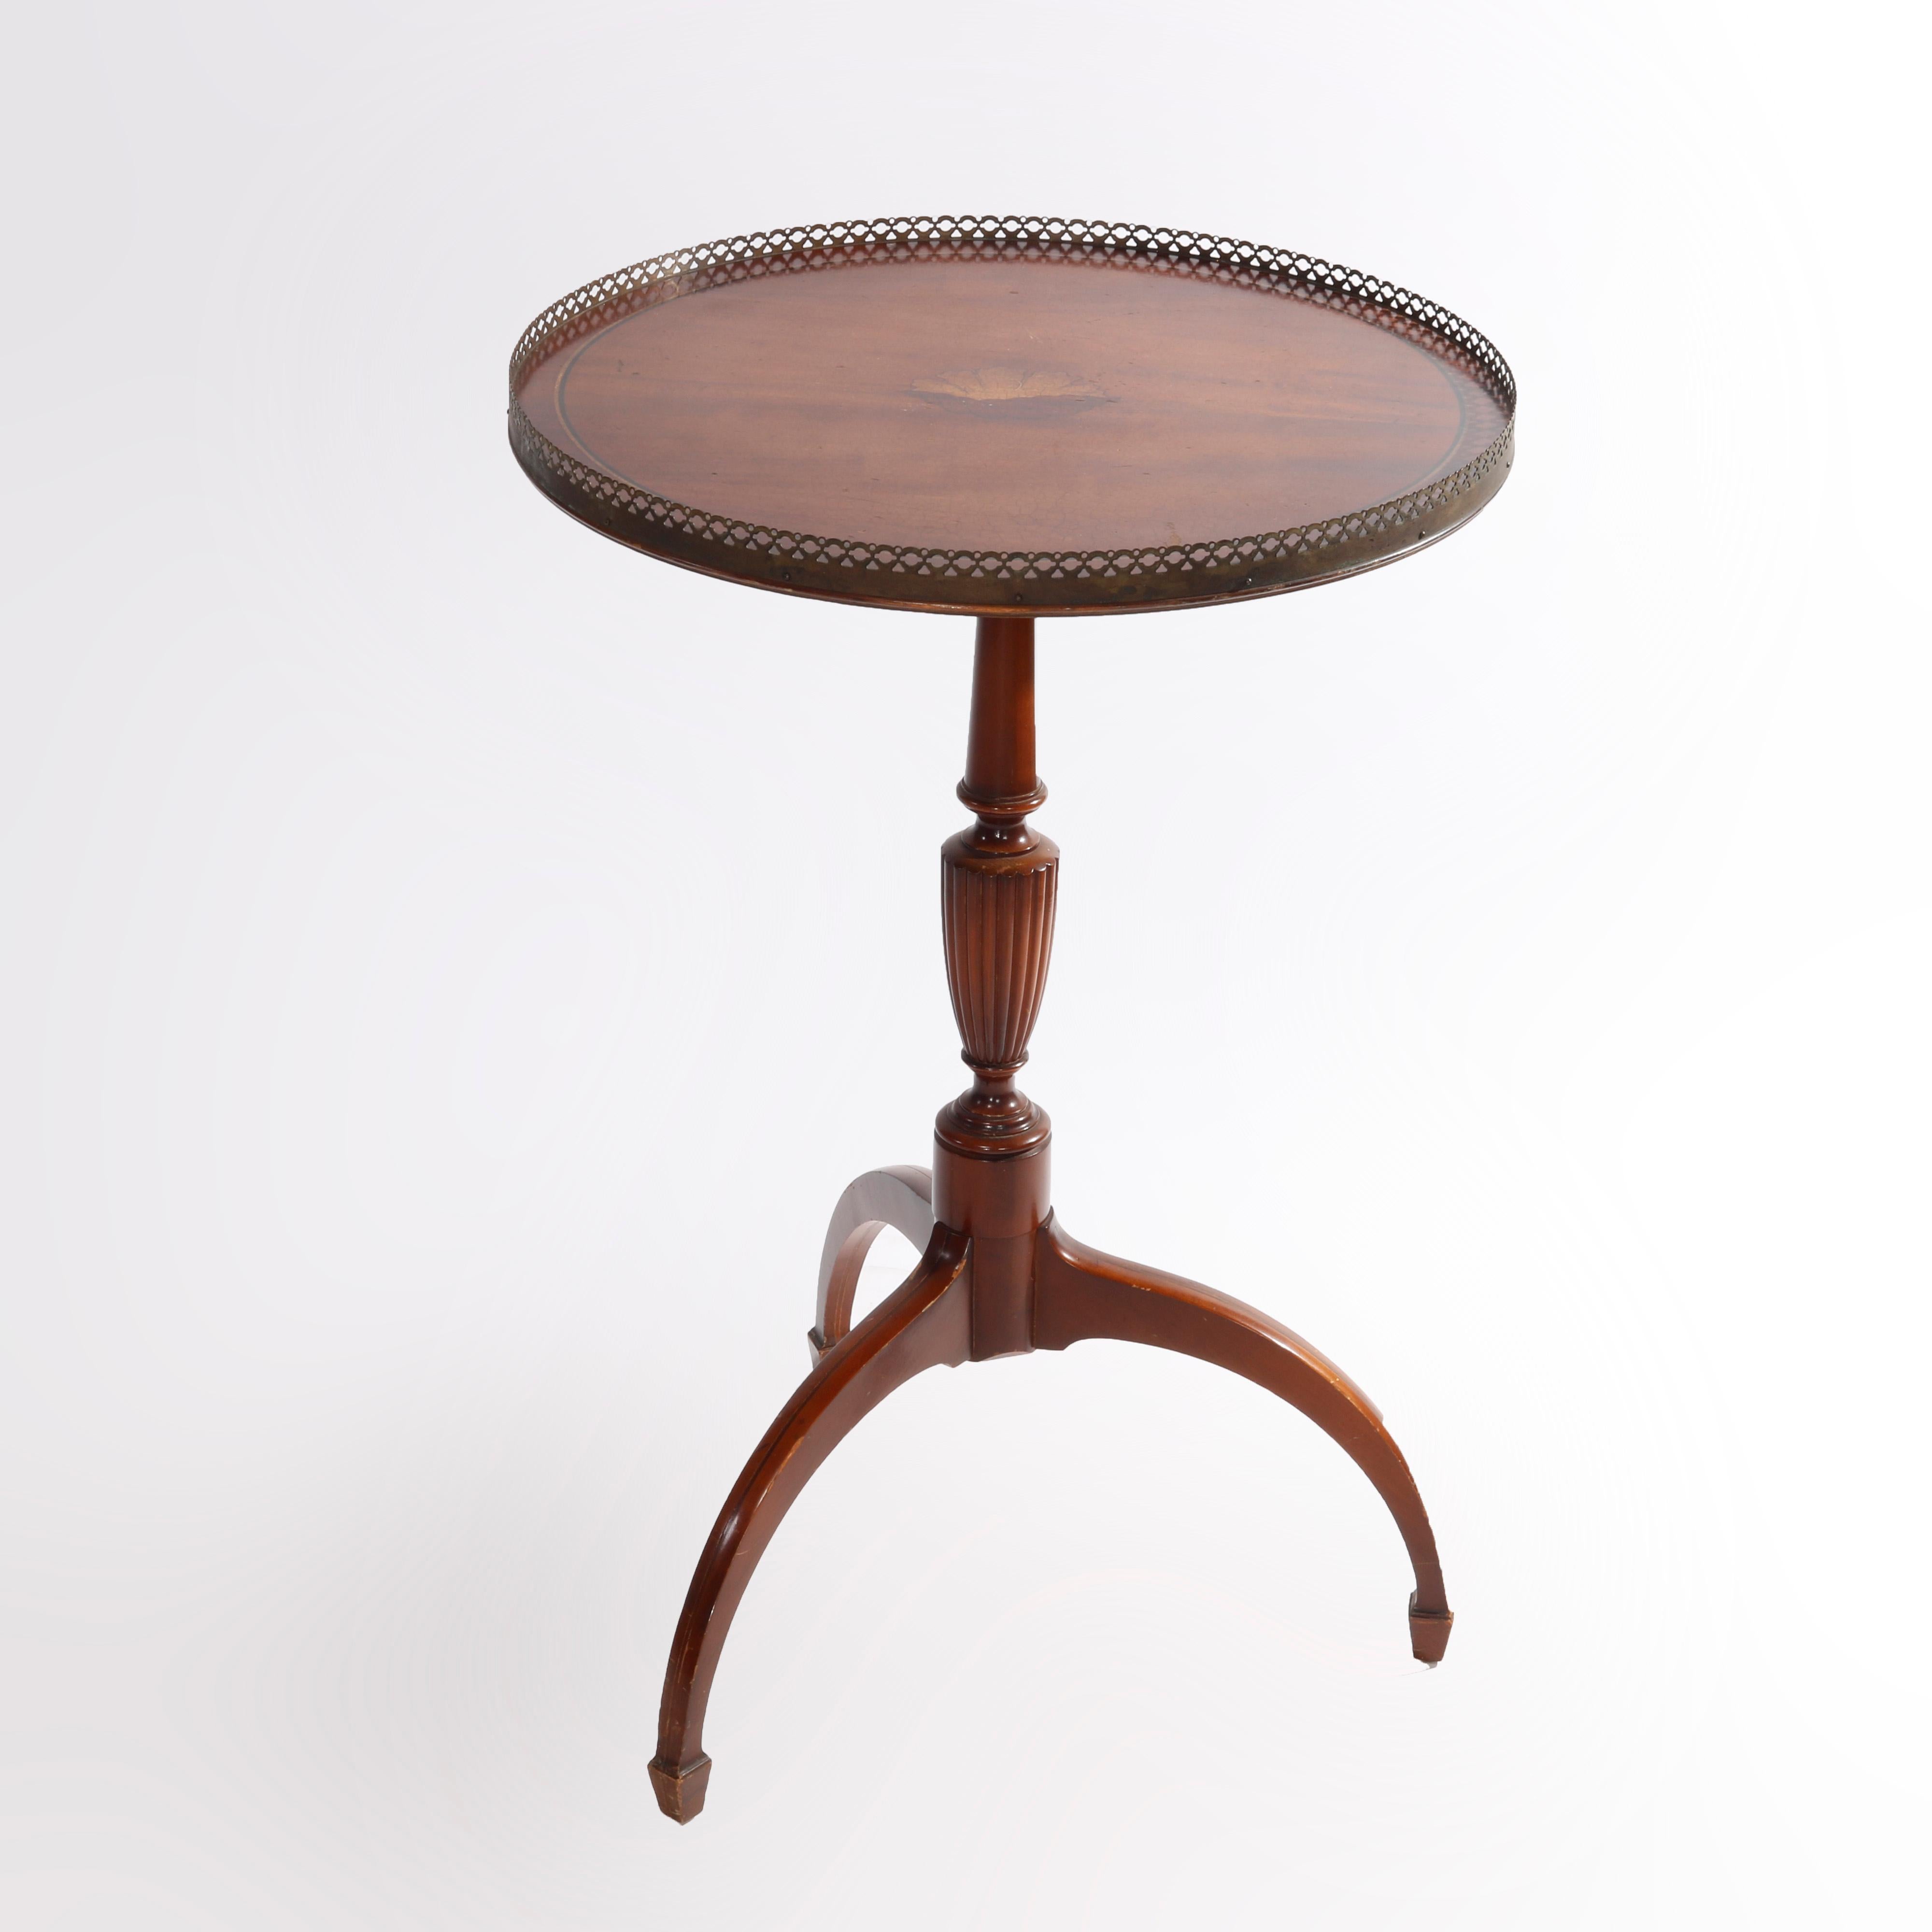 English Regency Mahogany Spider Leg Parlor Table with Inlay Shell Center, c1930 For Sale 2